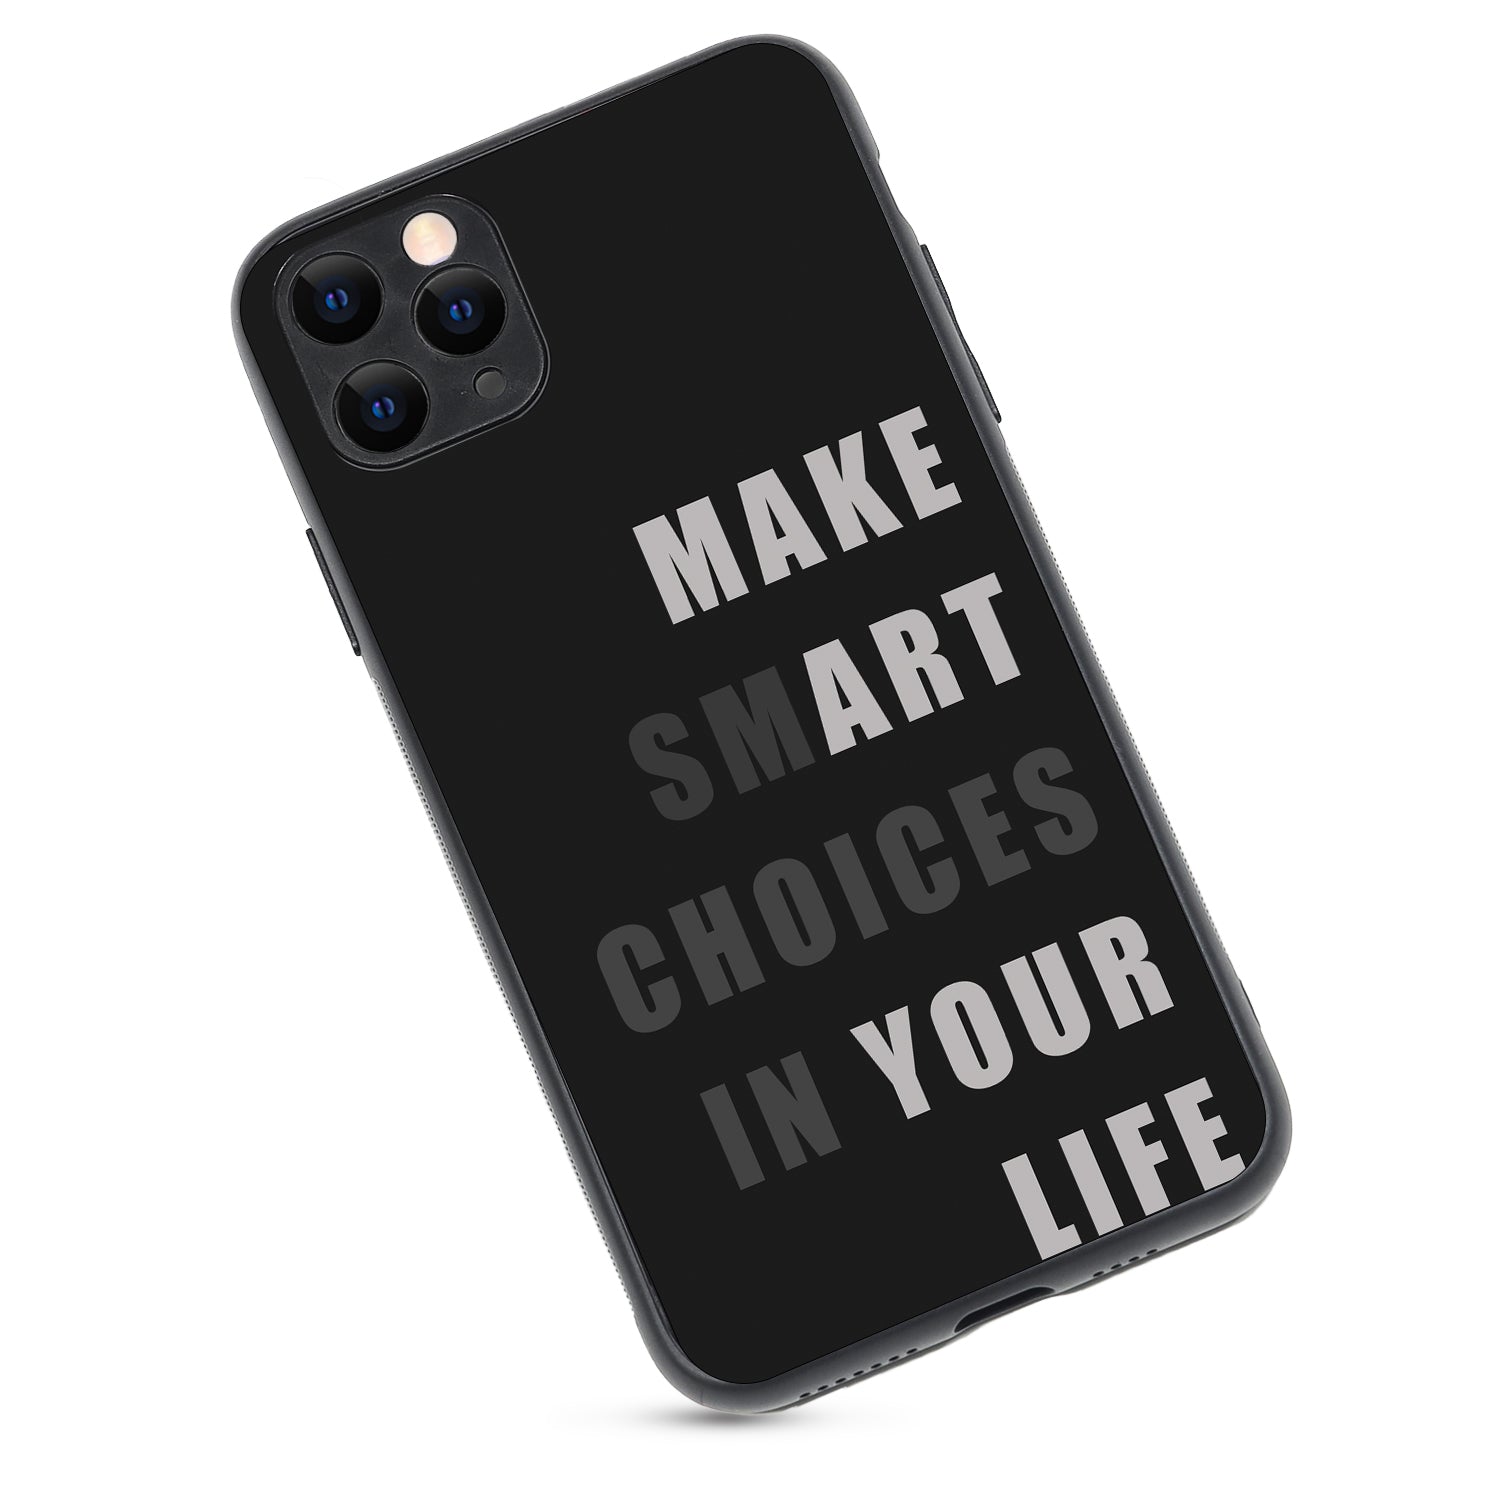 Smart Choices Motivational Quotes iPhone 11 Pro Max Case